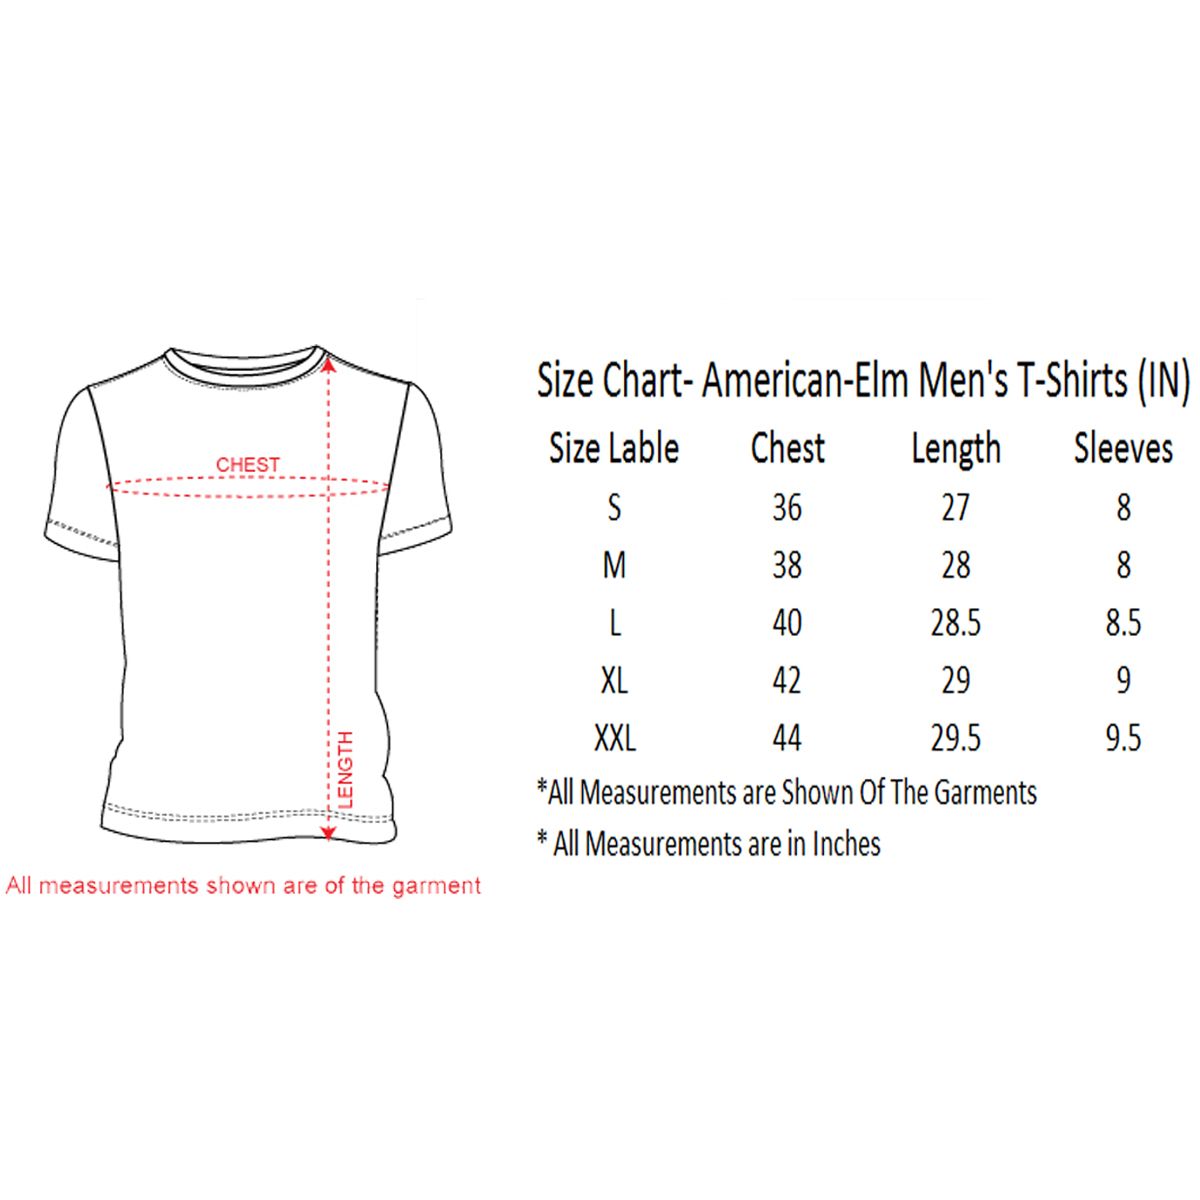 Slim Fit Tee Size Chart